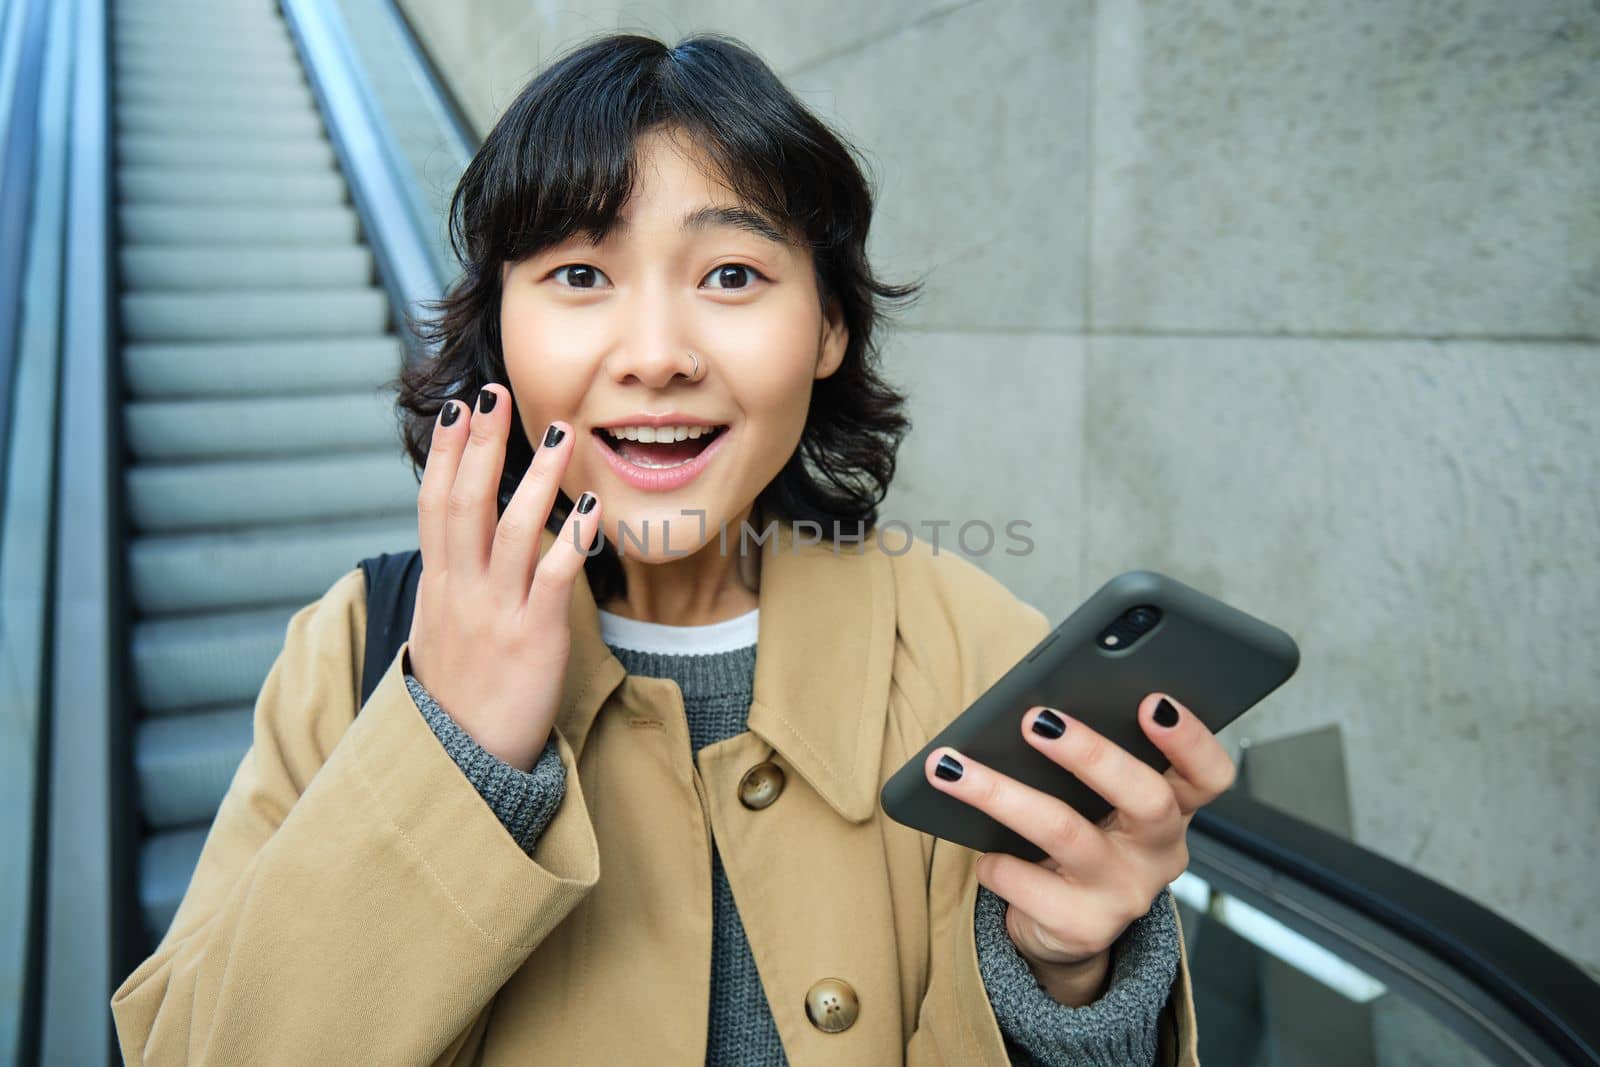 Joyful and positive korean girl, celebrates, looks surprised, goes down escalator with smartphone and looks amazed by smth.